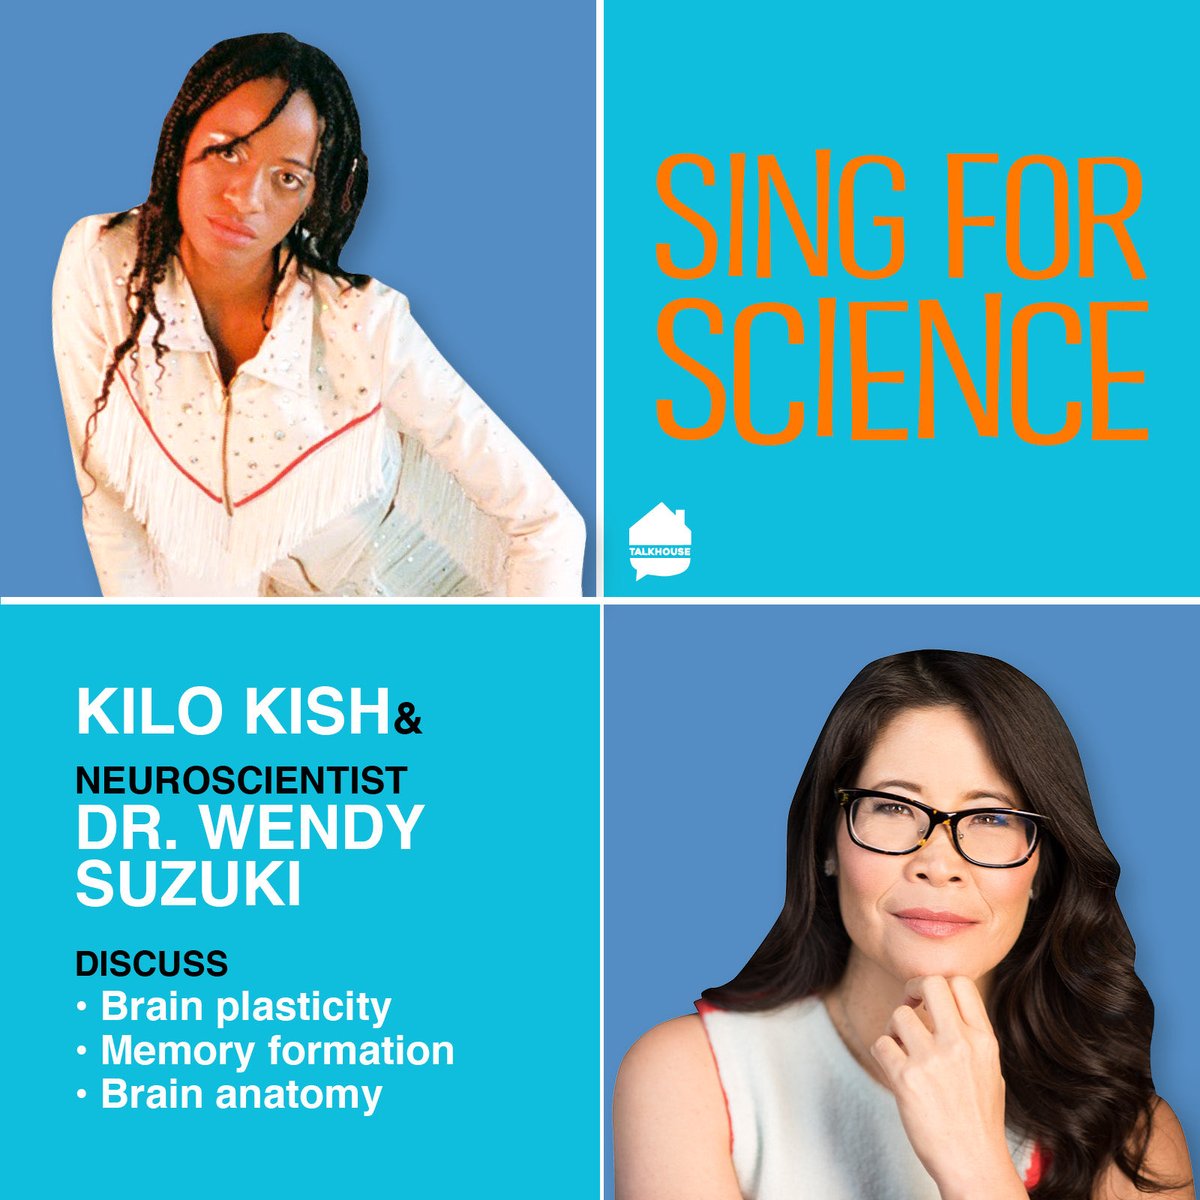 I had a fantastic live conversation with @KiloKish and @SingforScience at this year’s @OnAirFest, tune in here: singforscience.org/episodes/kish We discussed music’s effect on neuroplasticity and more, join us!